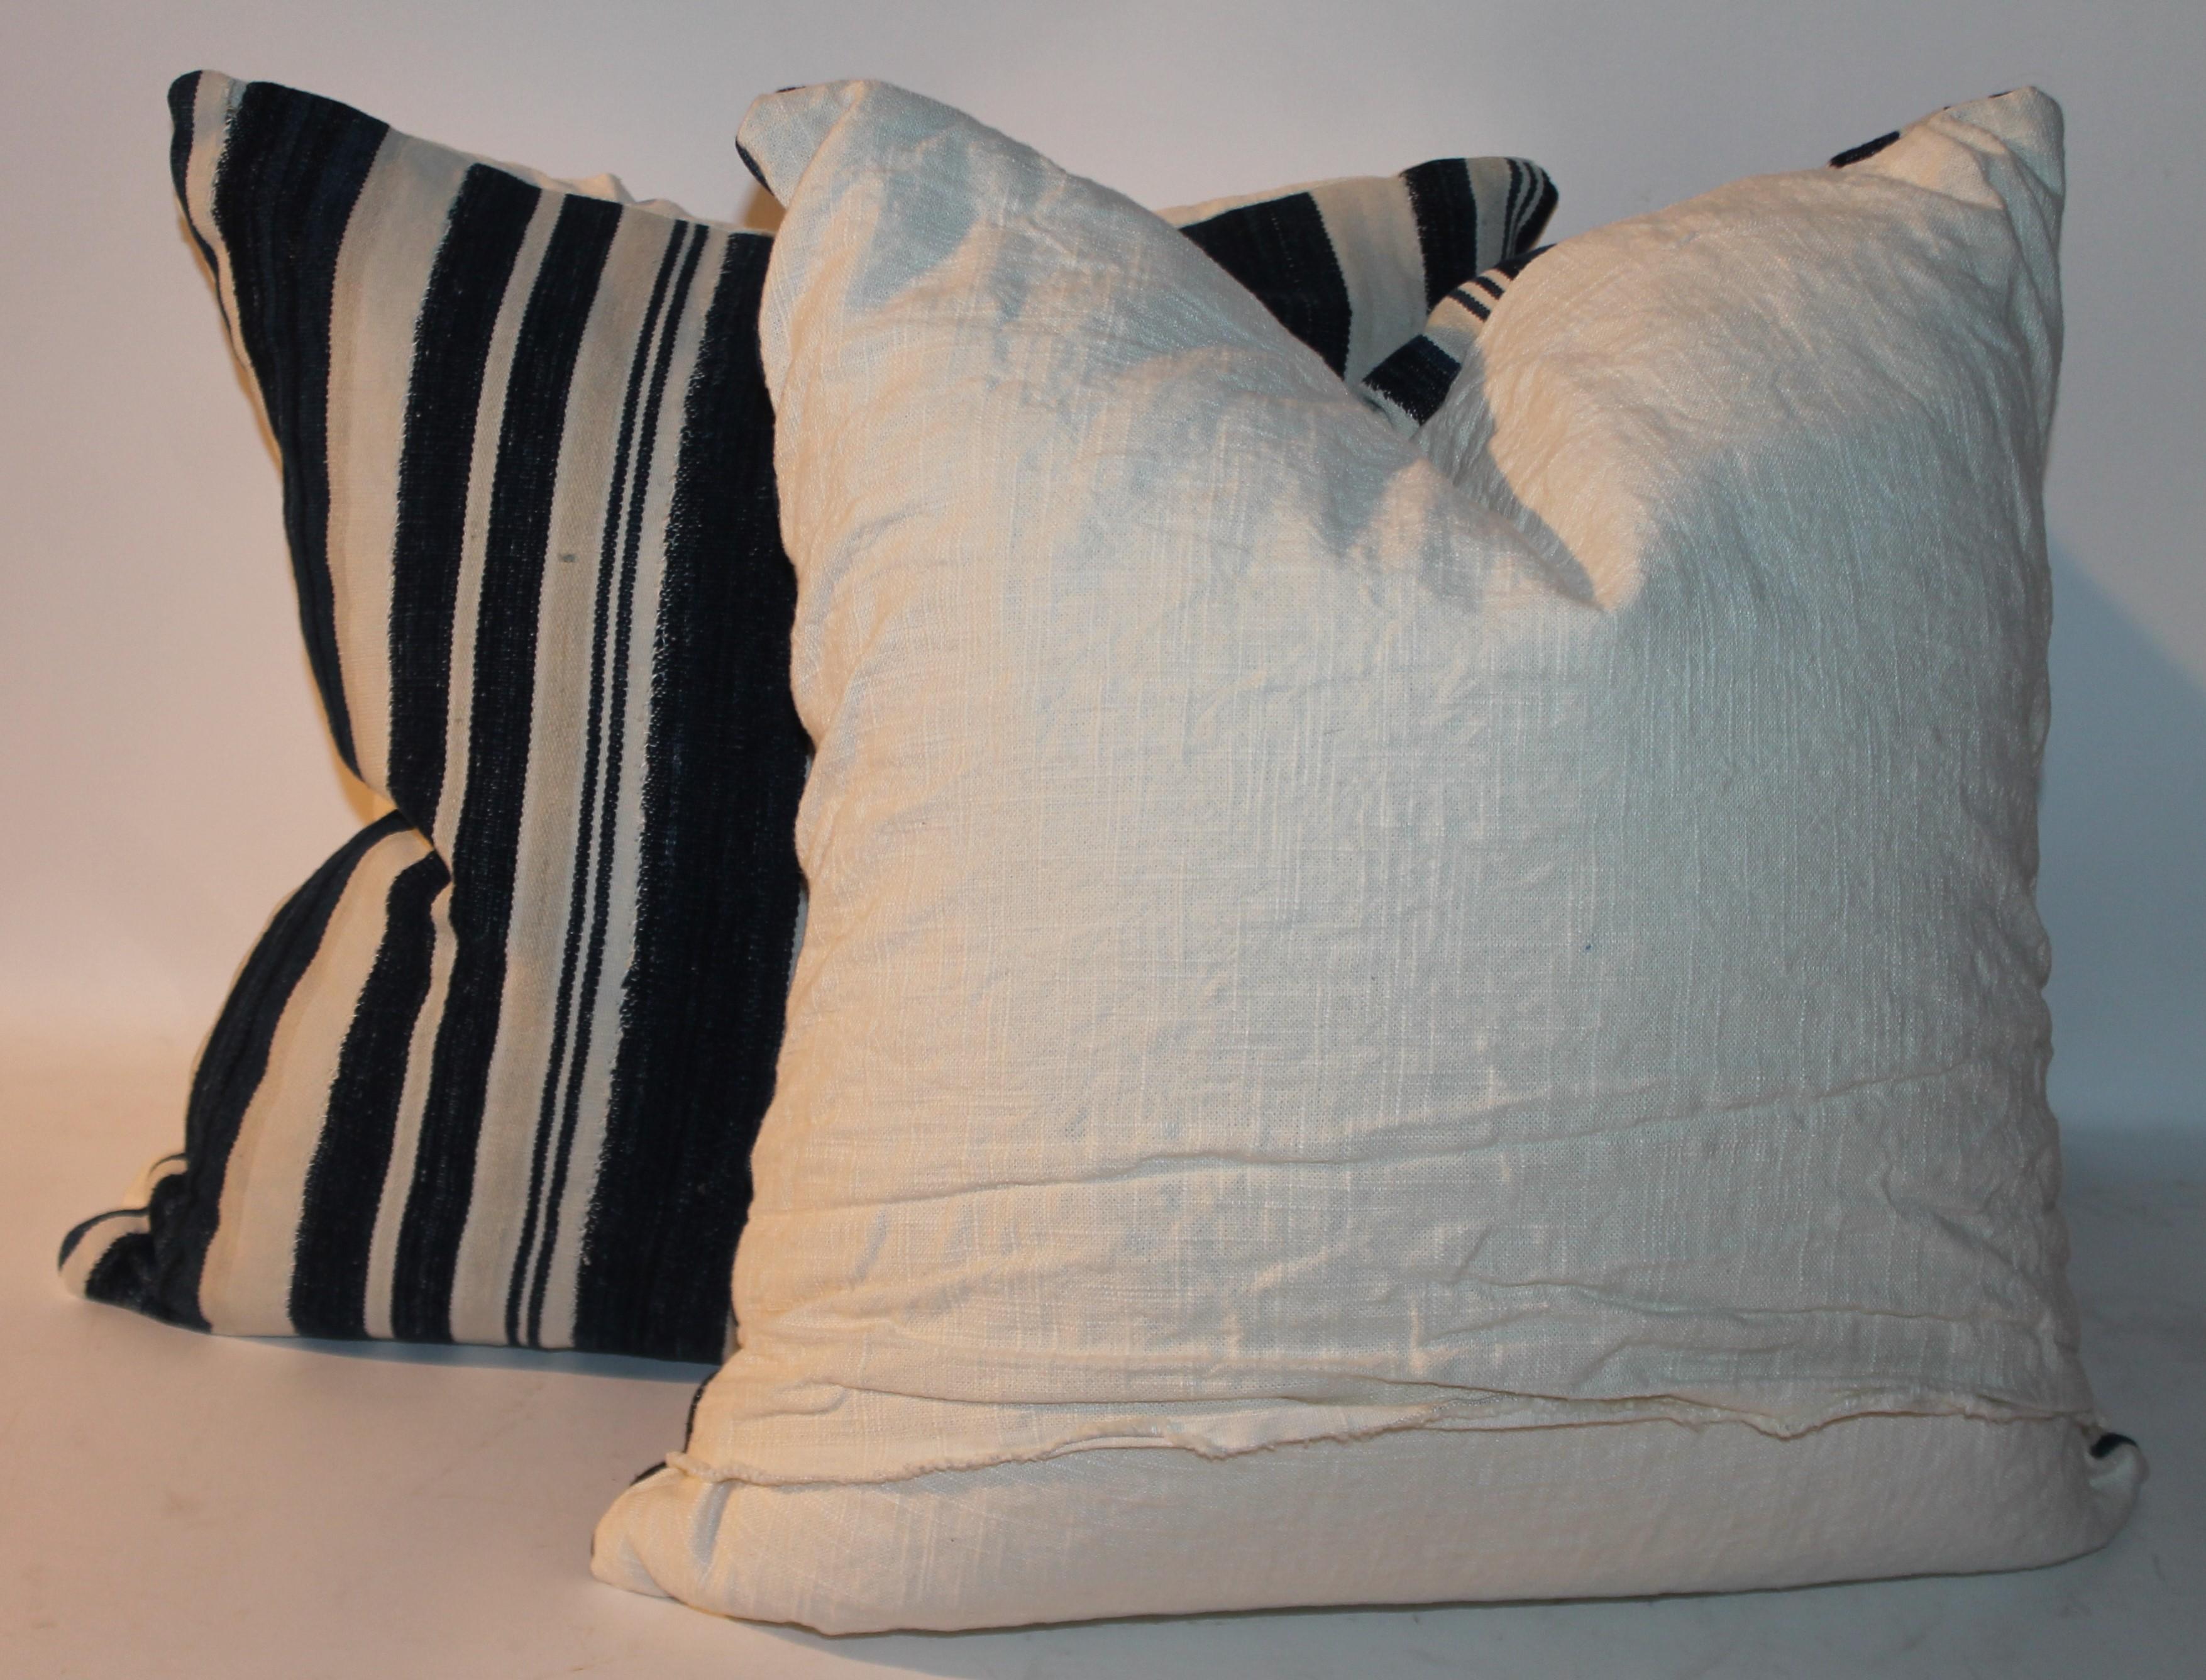 These fine indigo striped linen pillows are in fine condition and have white linen backing. They are all cotton and are down & feather fill.